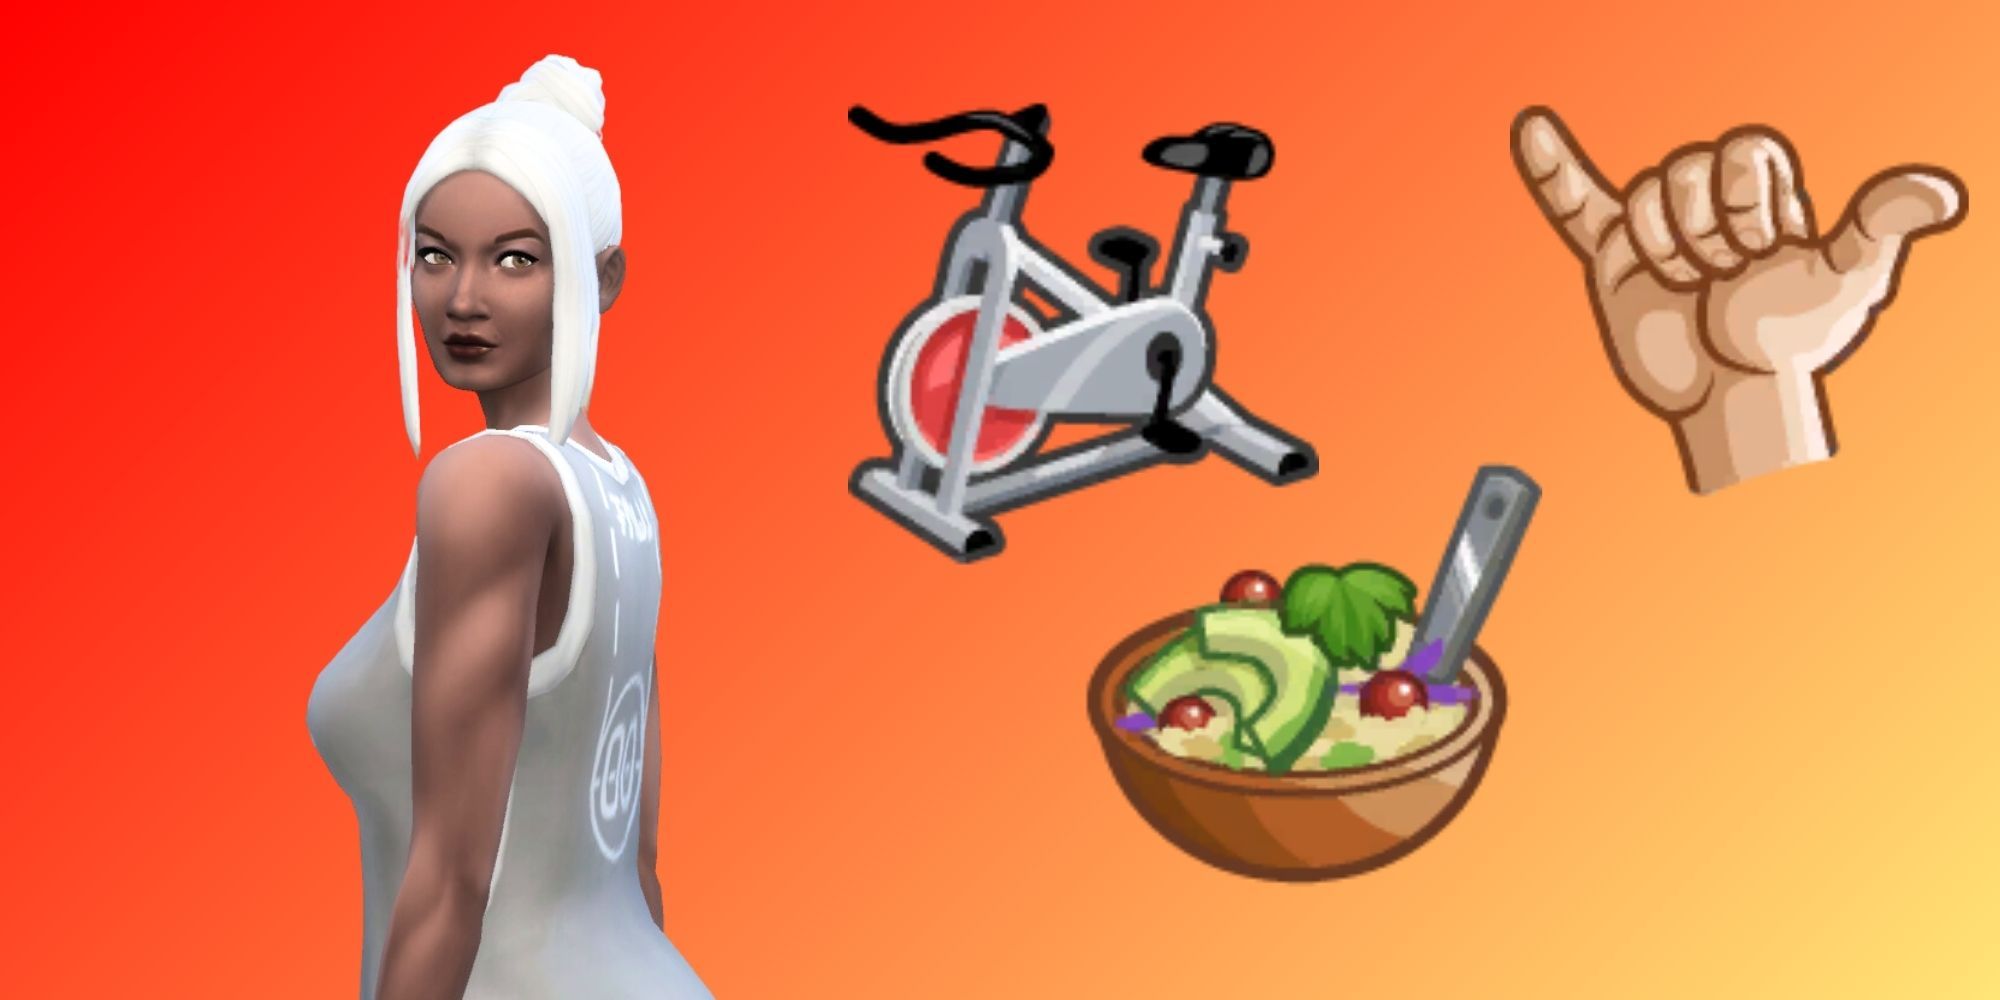 A feminine Sim looks over her shoulder as she stands next to icons representing an exercise bike, a healthy bowl of food, and the Bro trait.